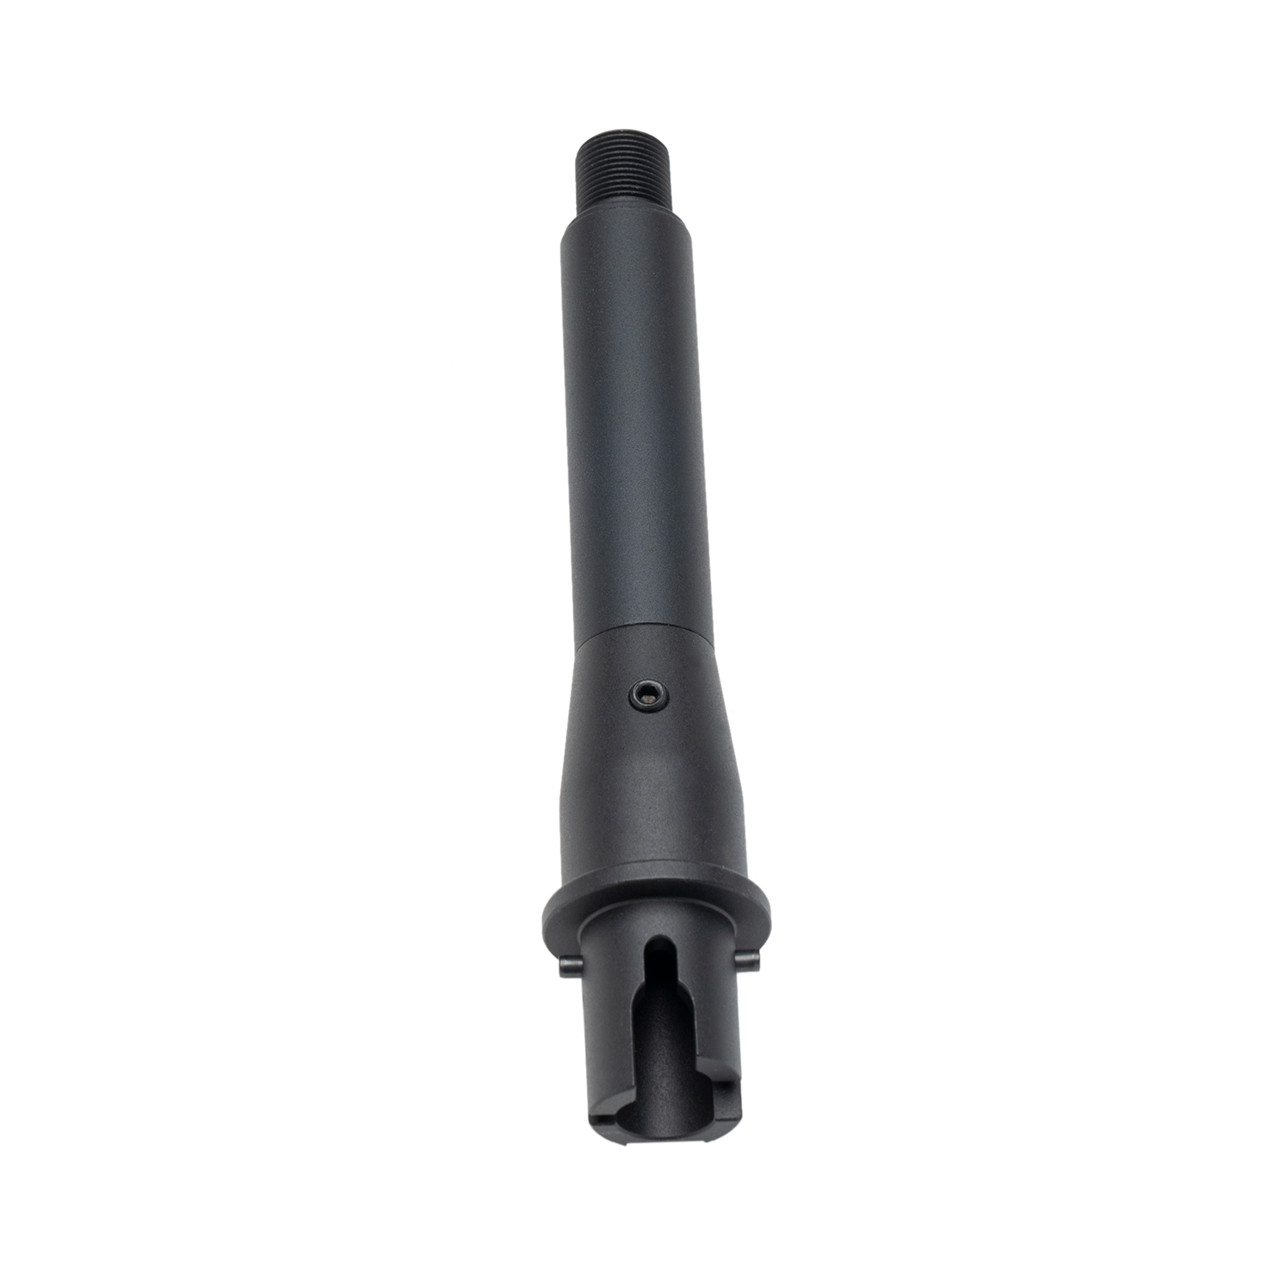 Shop Trident PDW Outer Barrel Assembly - $ 45 - Krytac.com | For Airsoft Use Only.